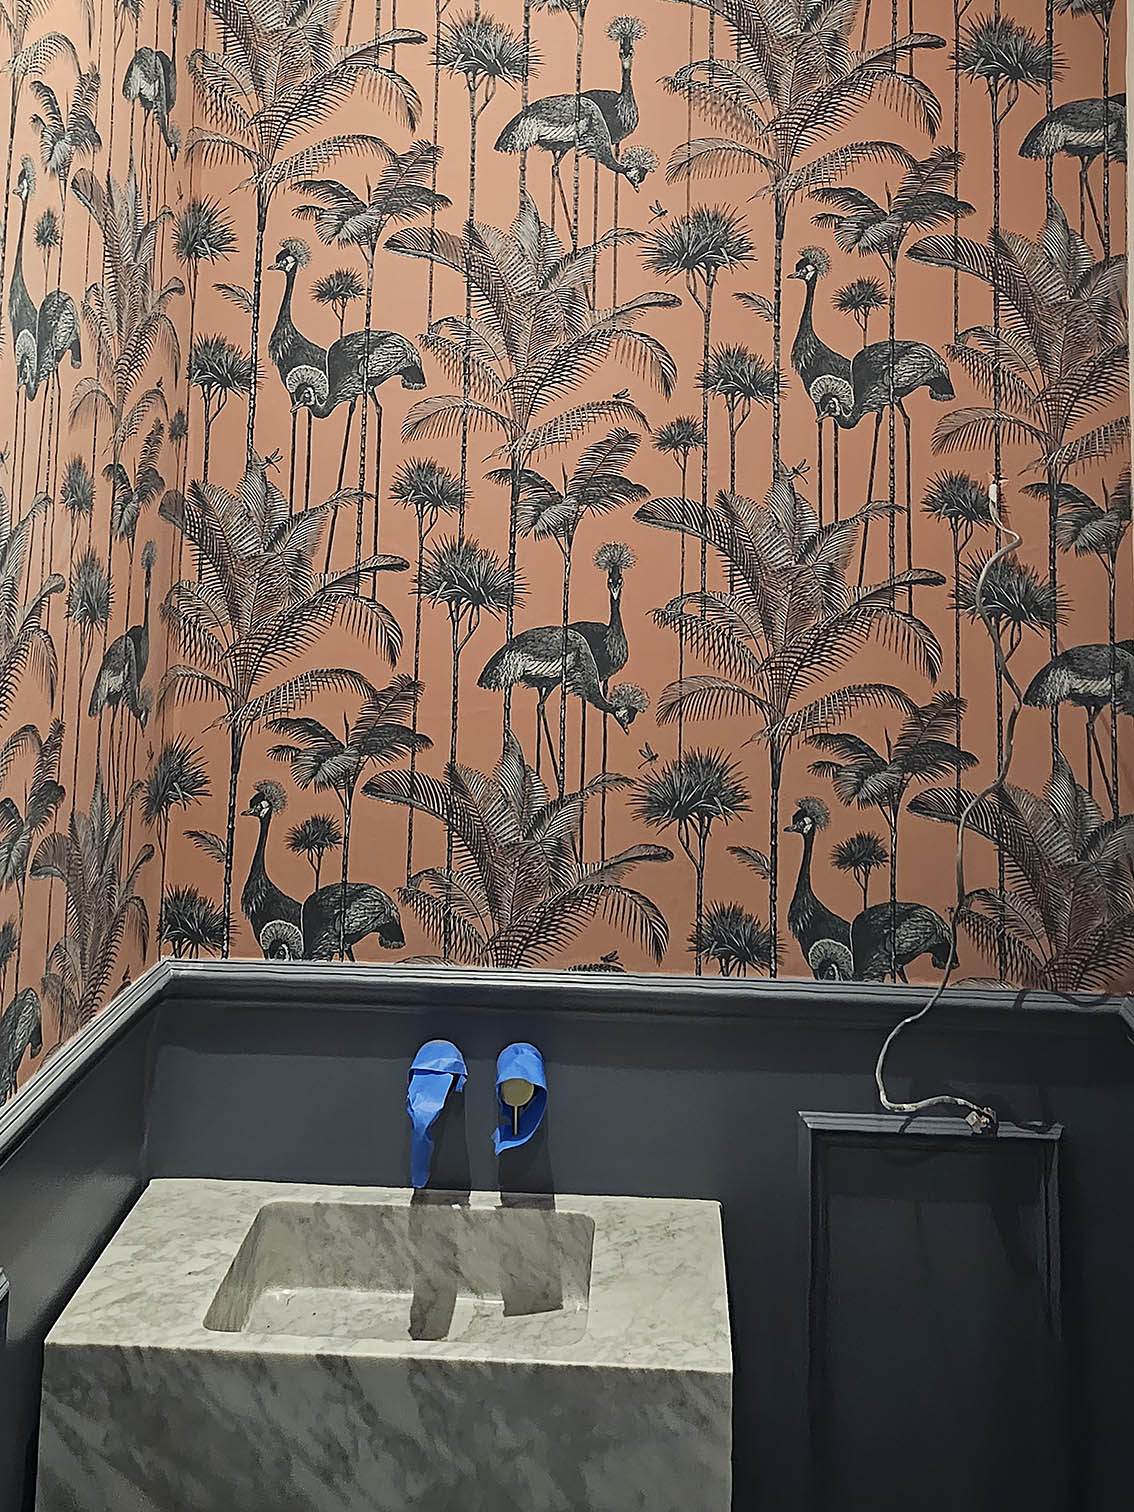 Red- orange wallpaper with flamingos and tropical plants wallpaper installed in a bathroom.